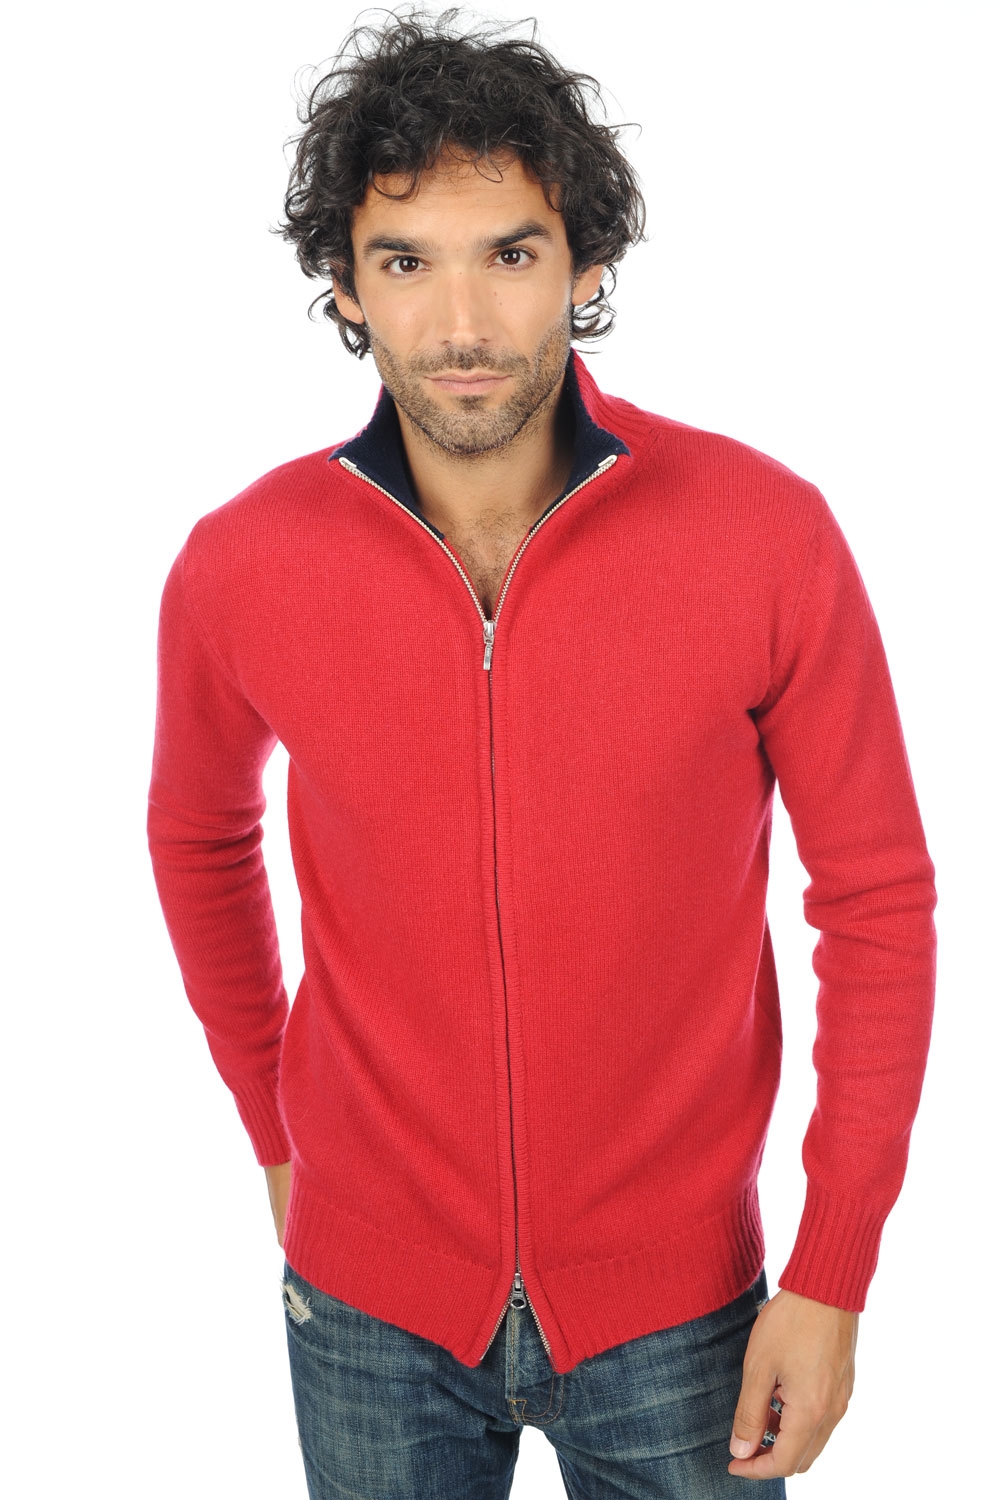 Cashmere men chunky sweater maxime blood red dress blue m